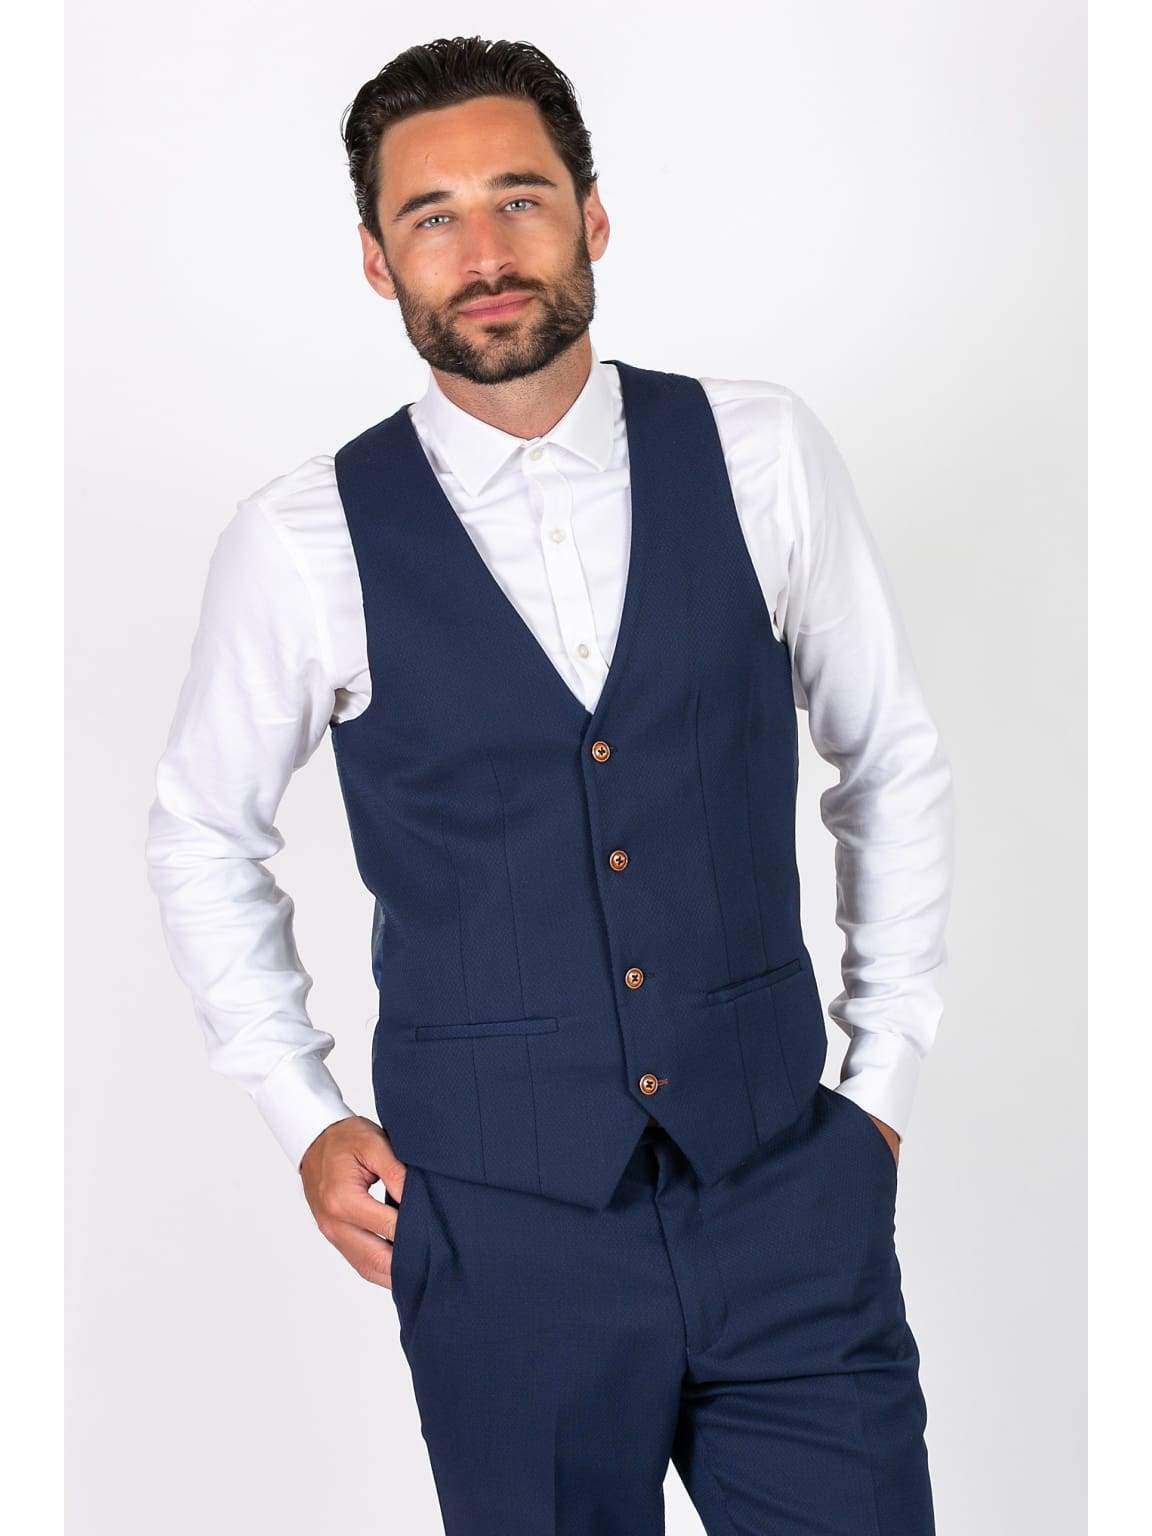 MAX - Royal Blue Single Breasted Waistcoat - 34R - Suit & Tailoring